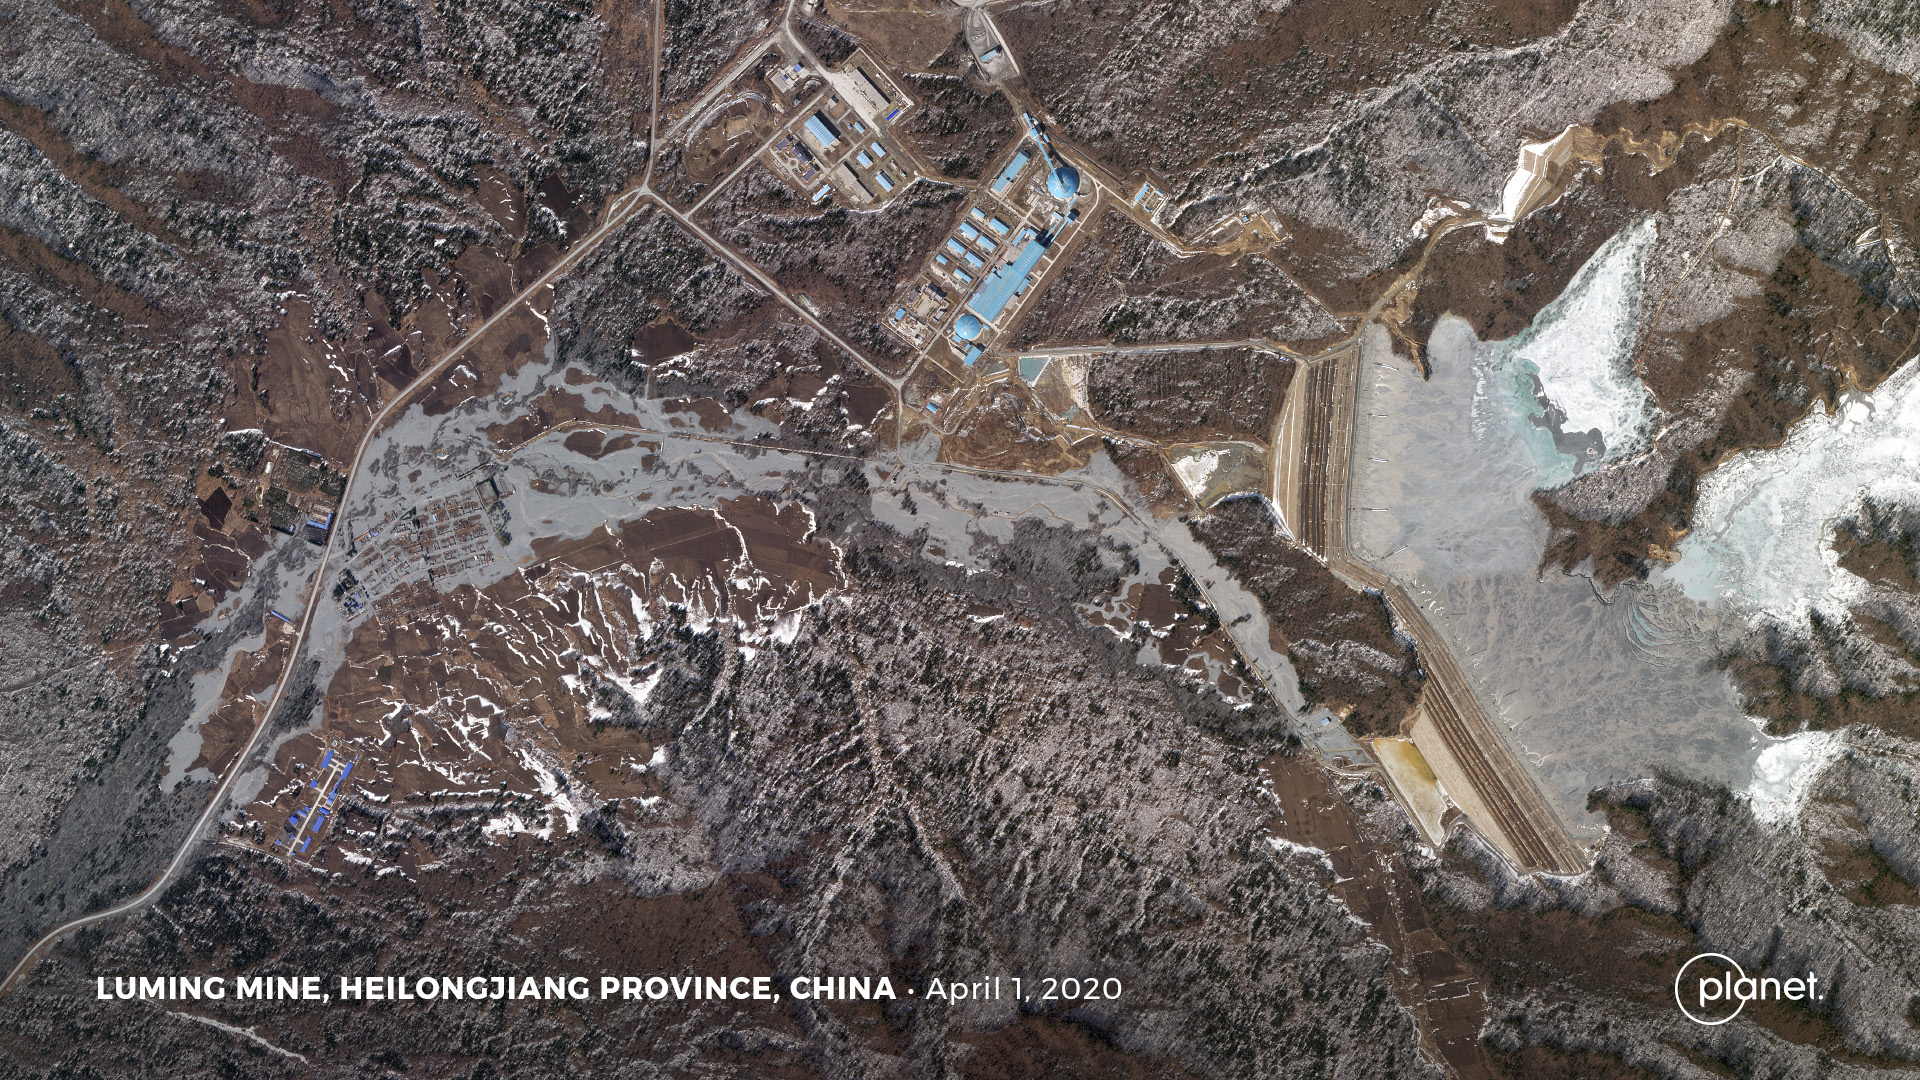 Luming Mine tailings accident